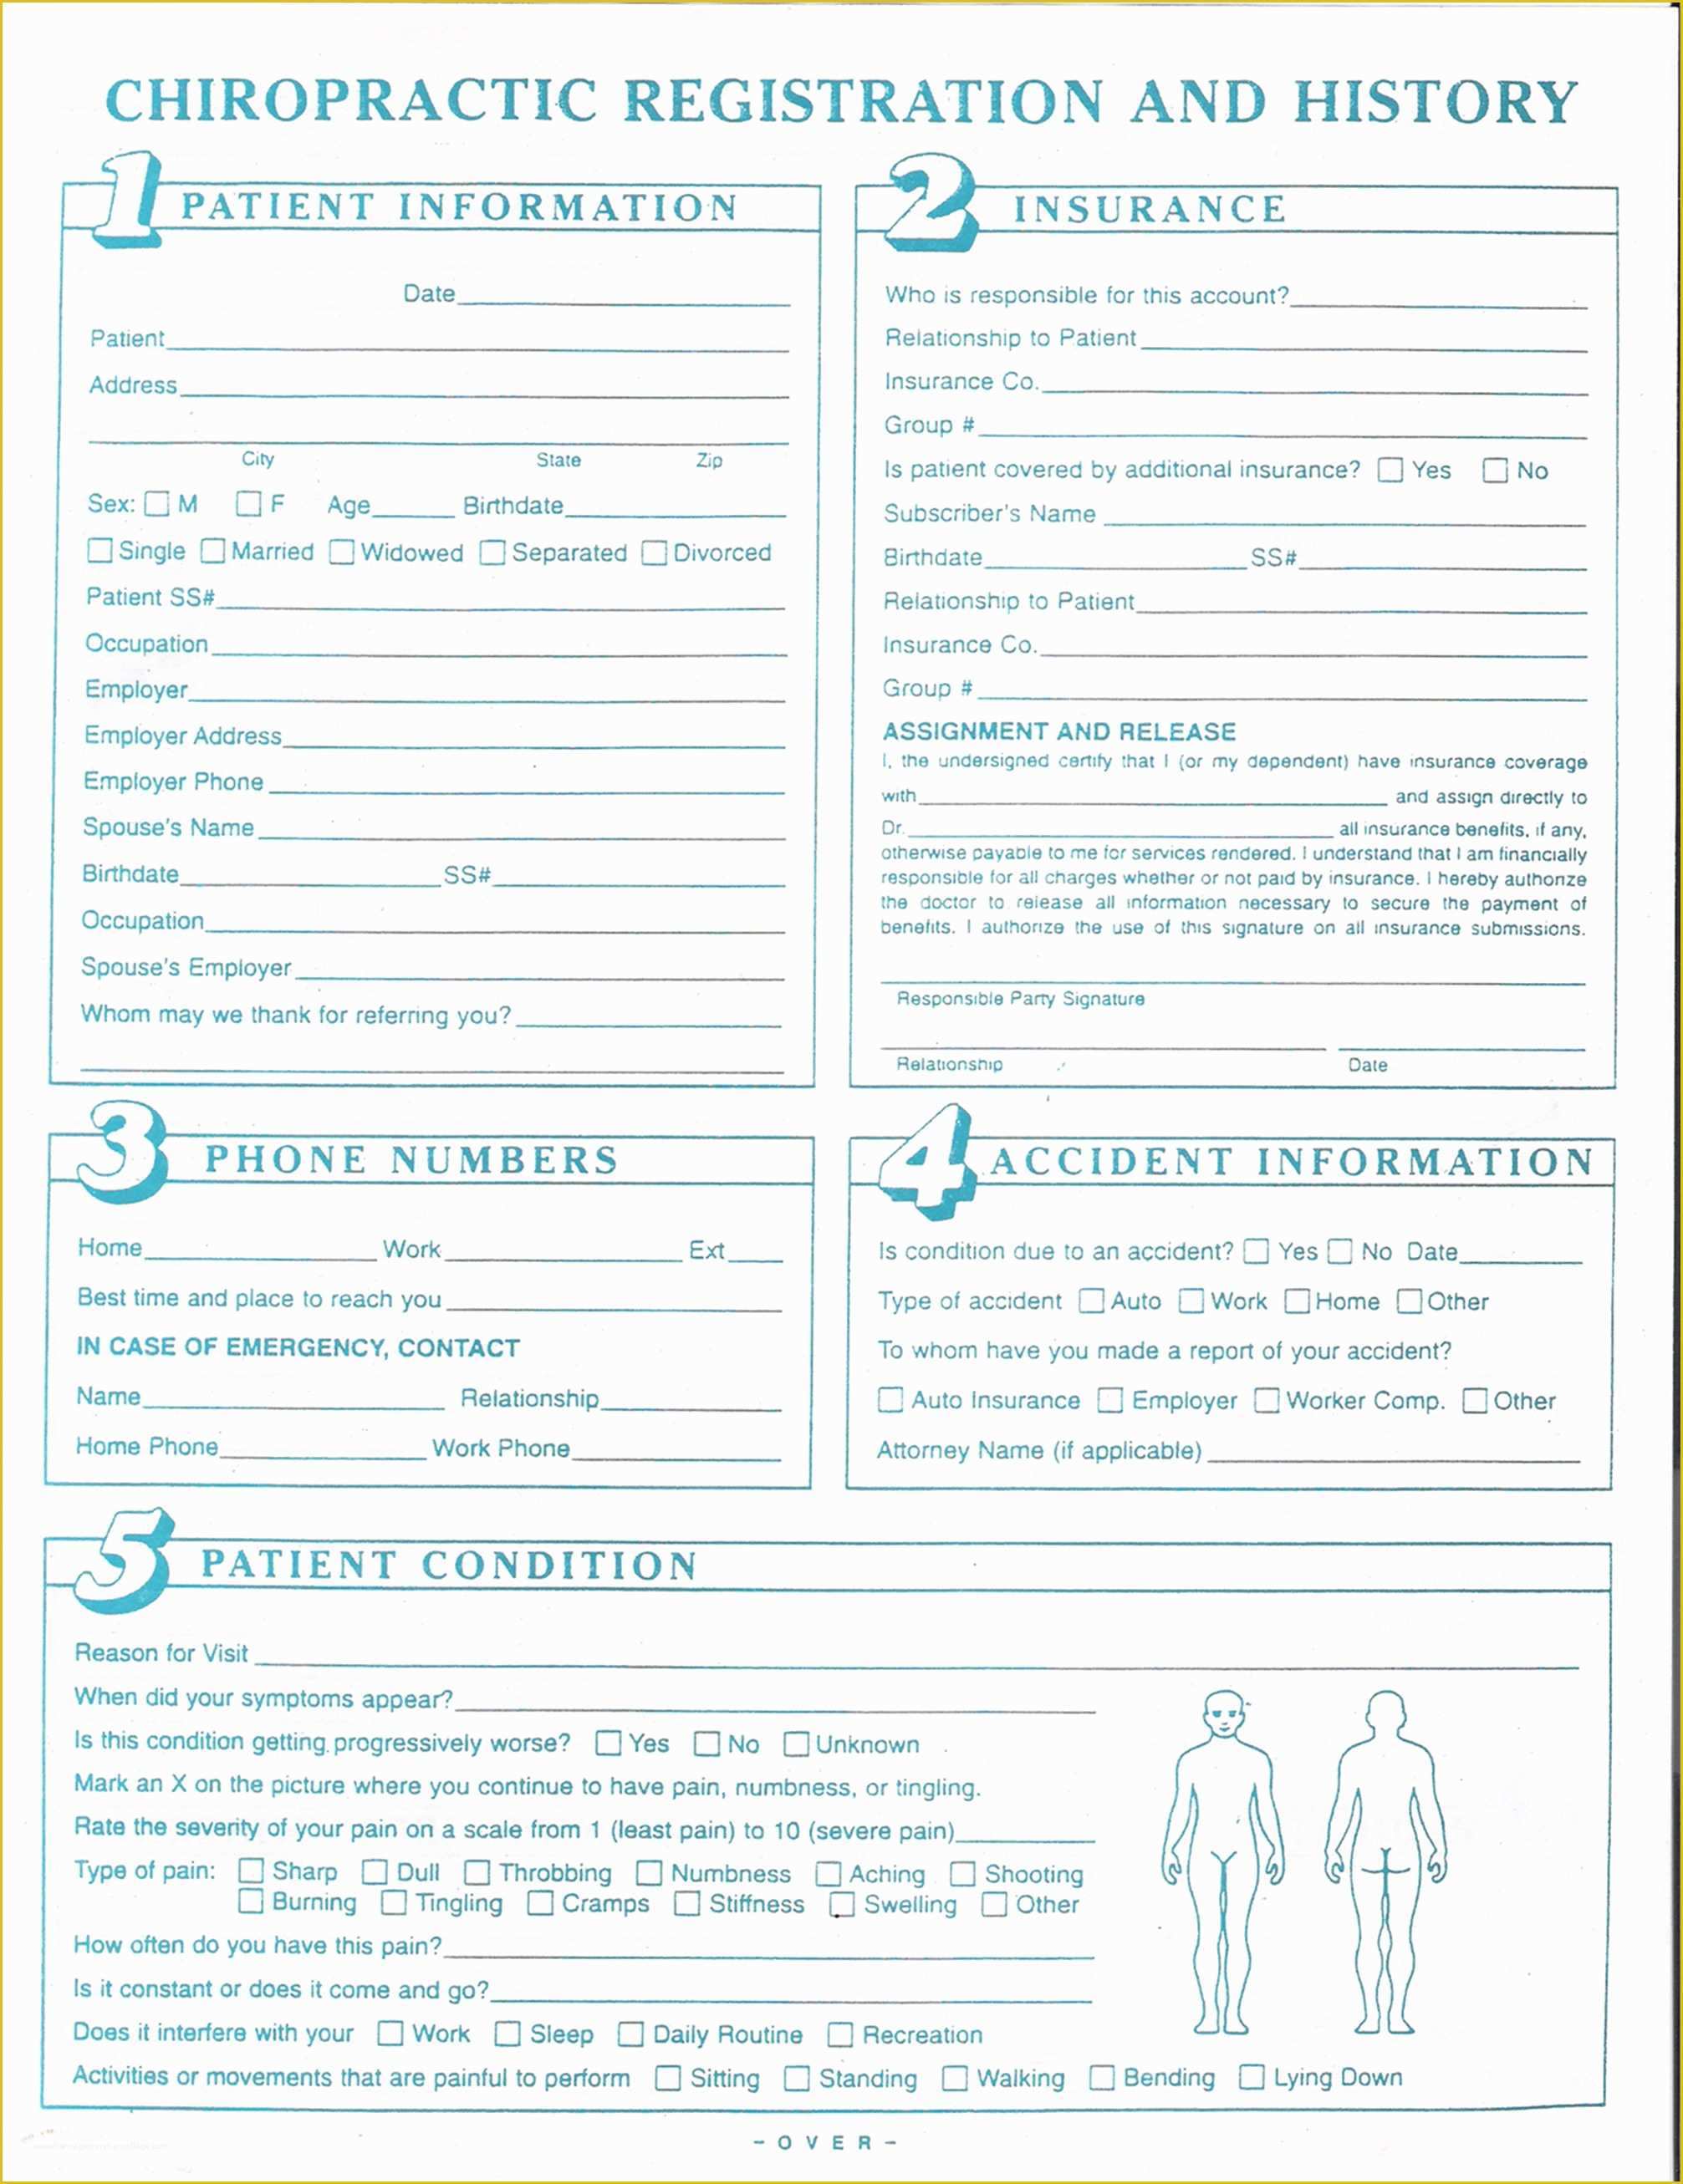 Chiropractic soap Notes Template Free Of Work Physical Exam Blank form Bing Images